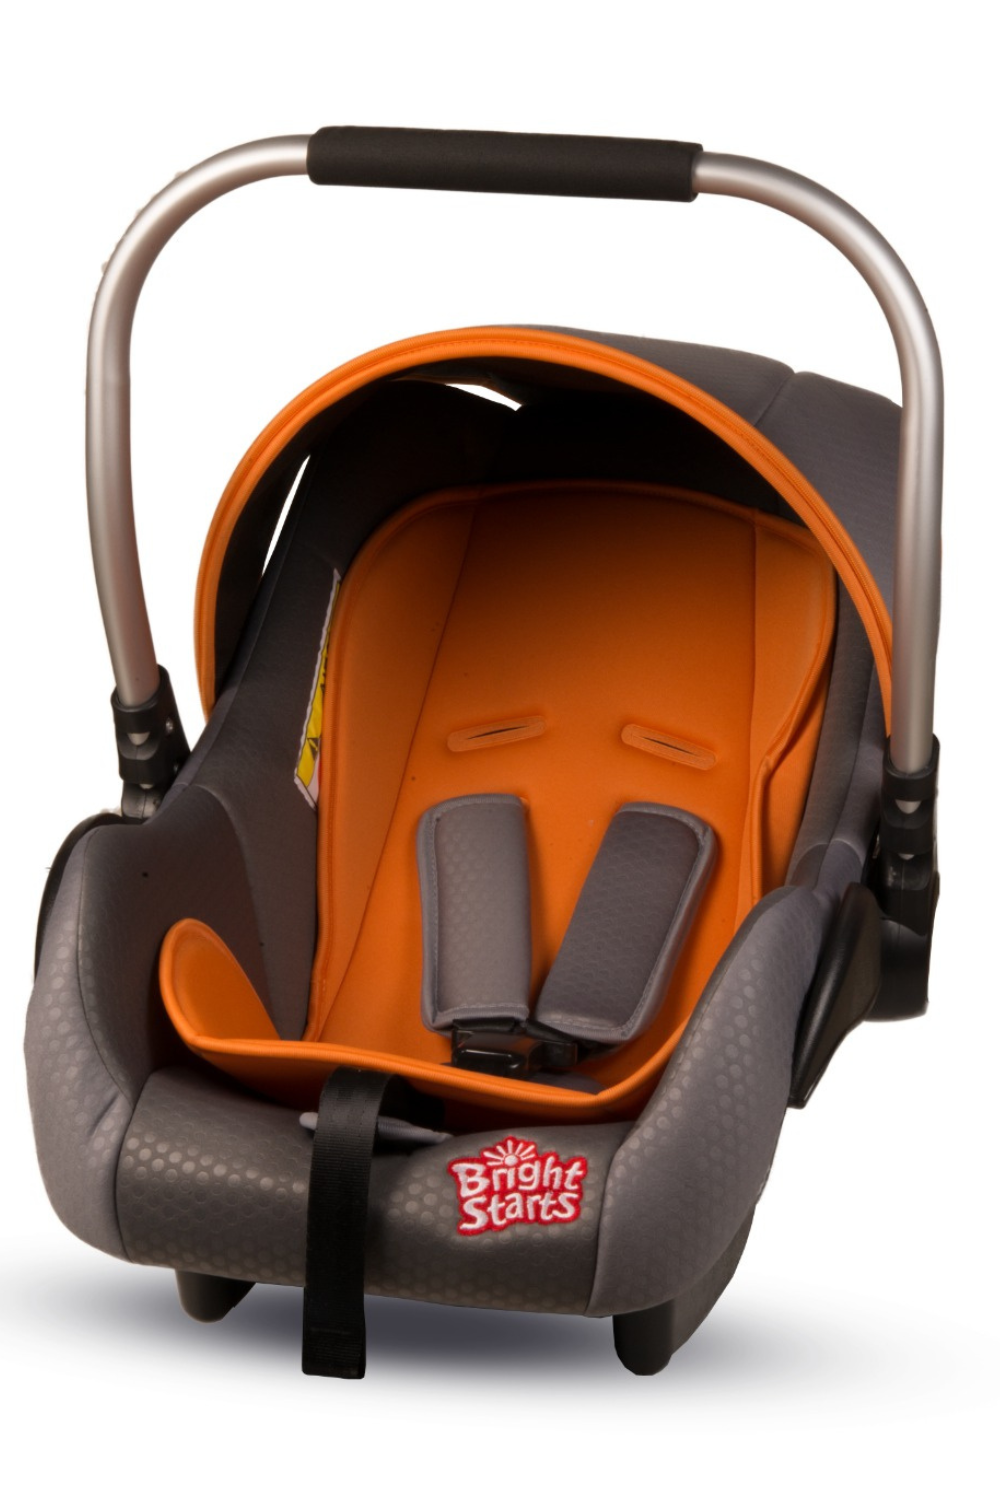 Brightstarts Carry Cot & Car Seat